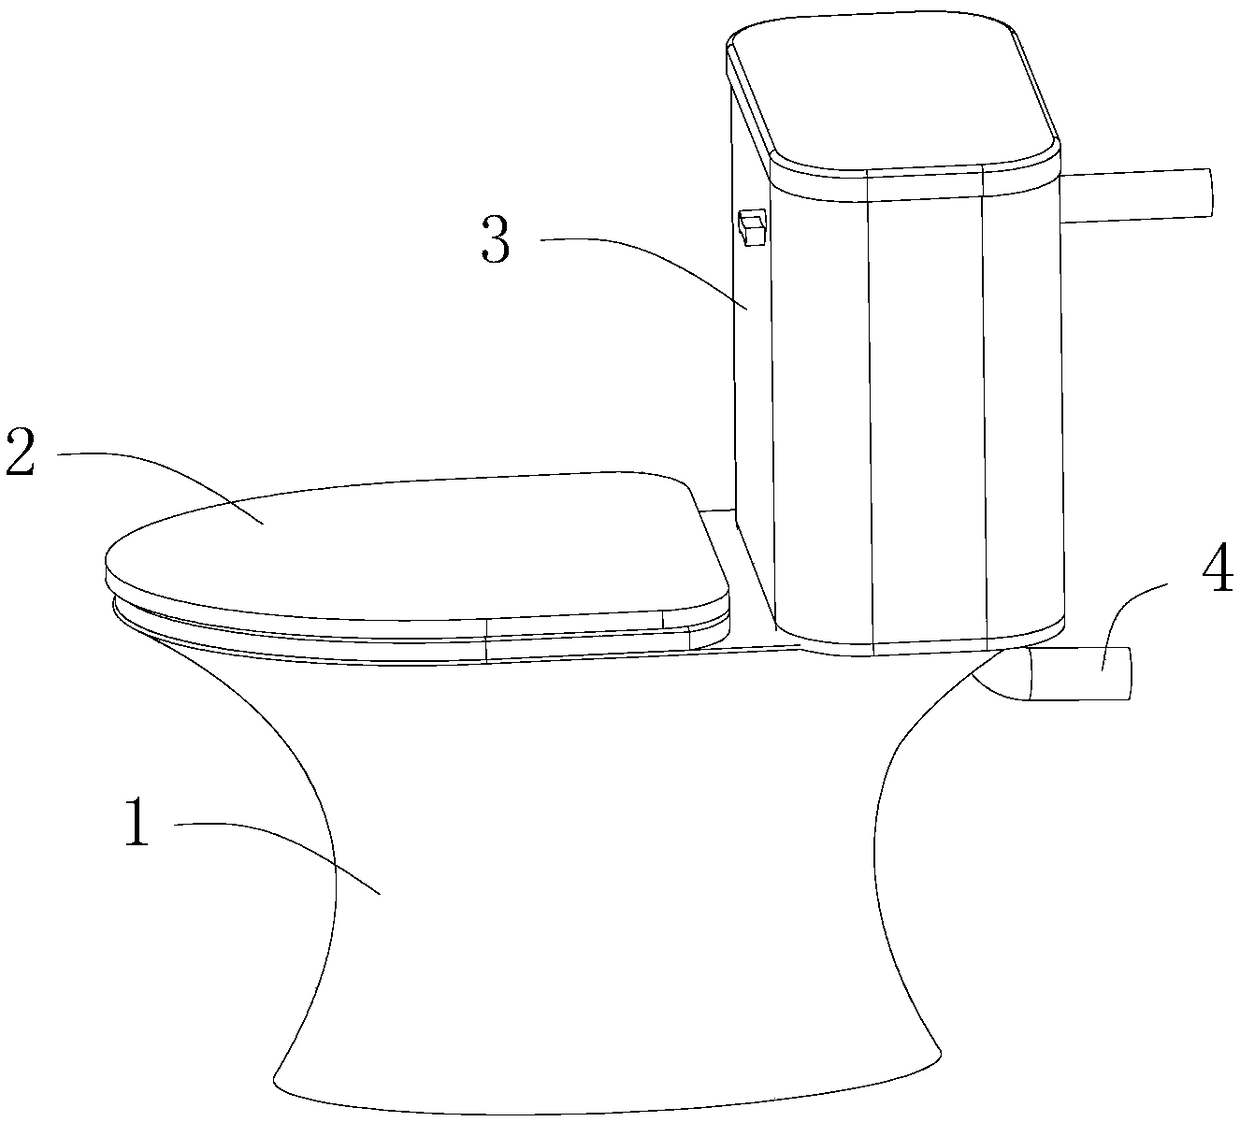 Ultraviolet disinfecting toilet bowl utilizing domestic wastewater